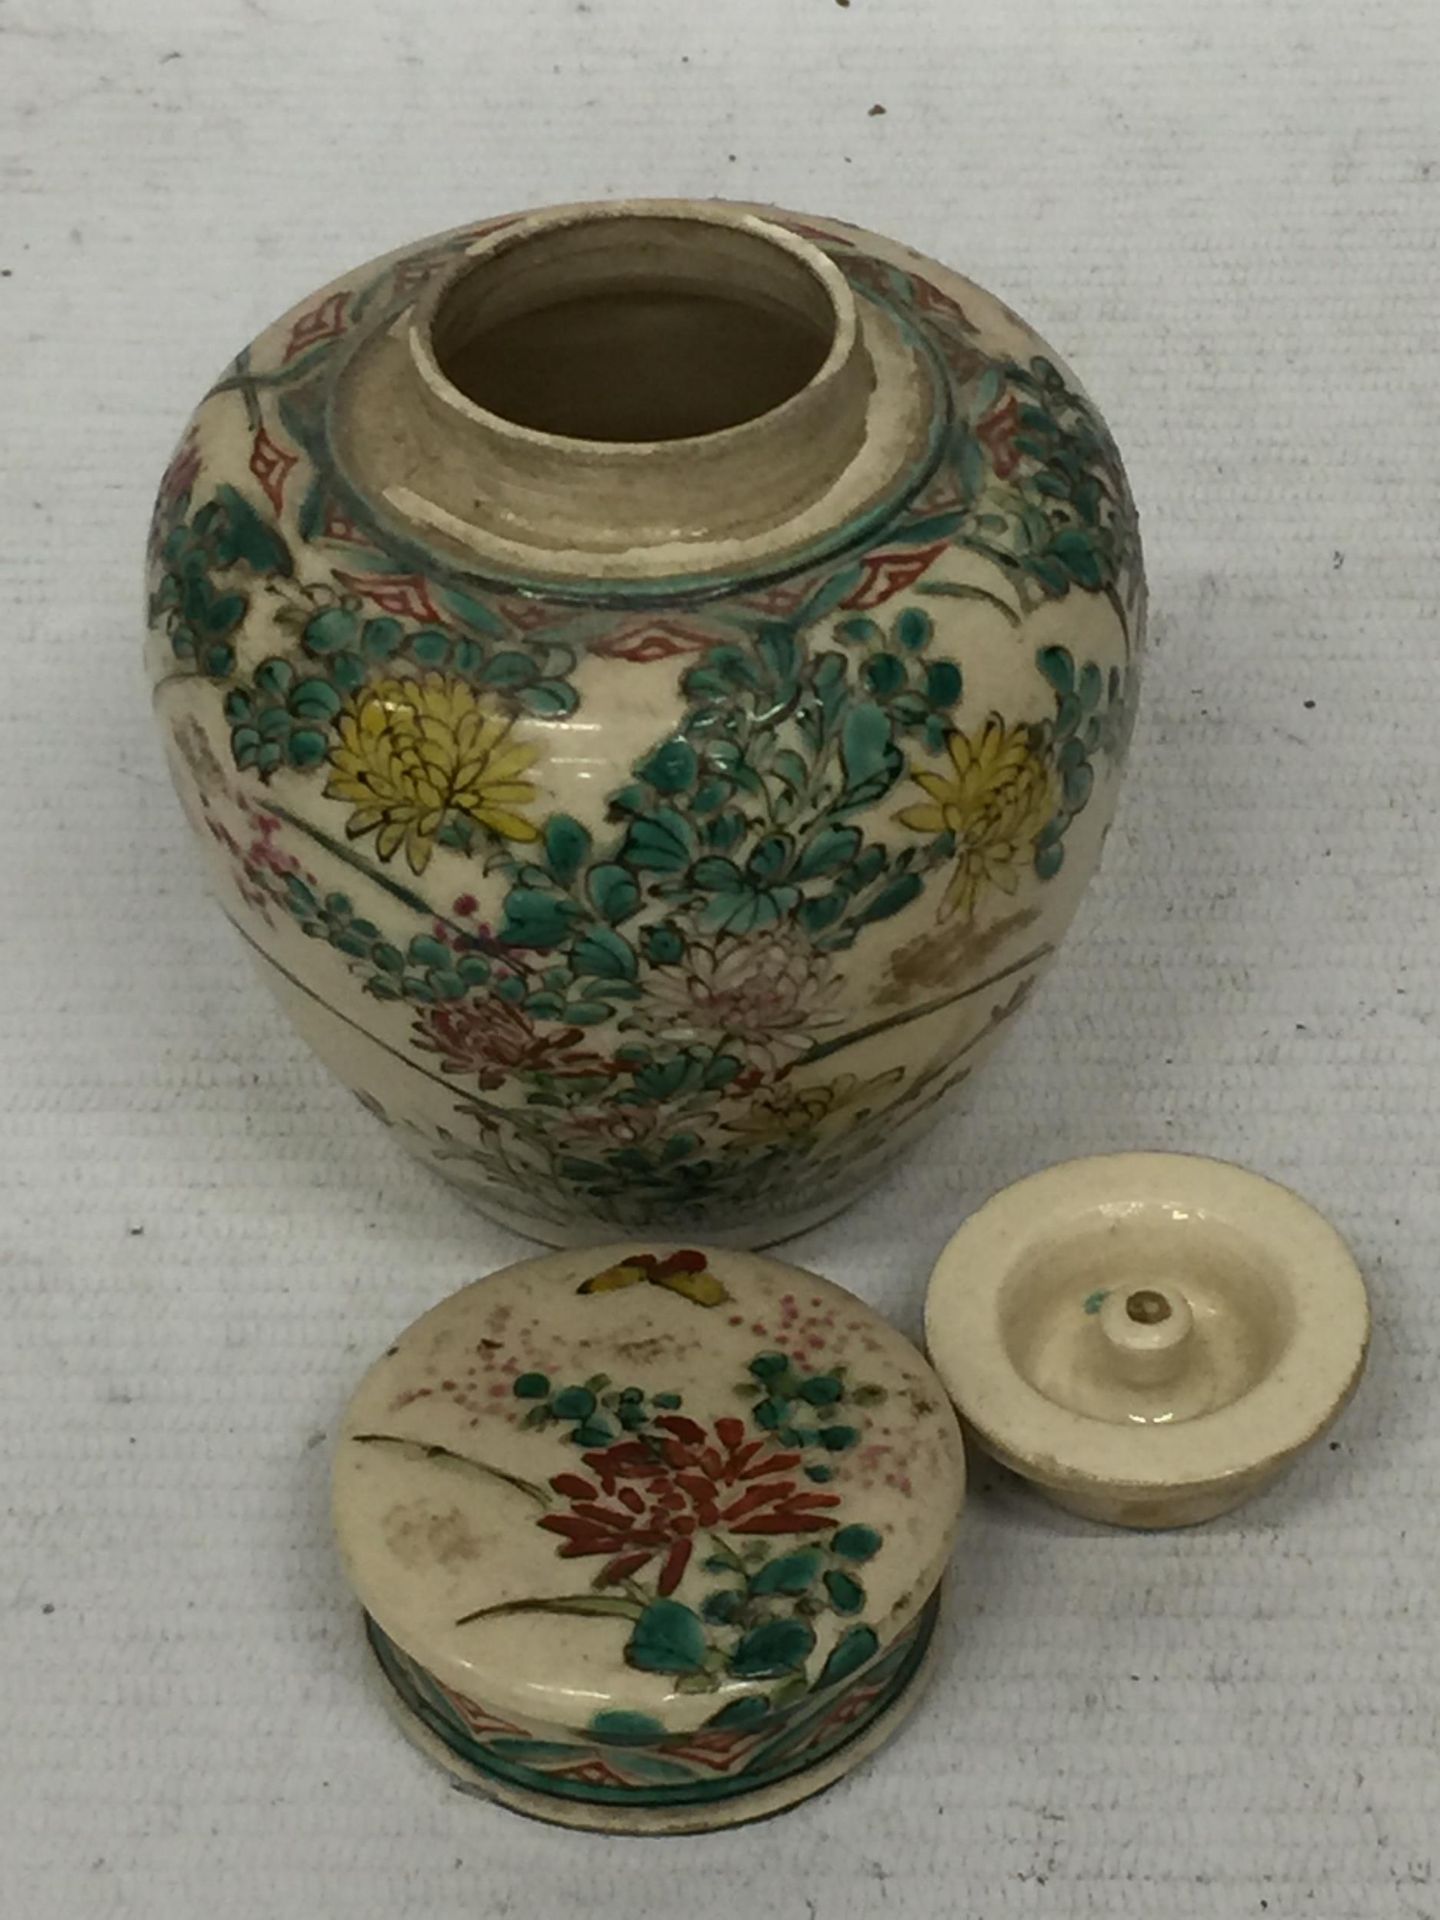 A JAPANESE STONEWARE LIDDED SMALL POT POURRI / GINGER JAR WITH BIRD AND FLORAL DESIGN AND INNDER LID - Image 6 of 7